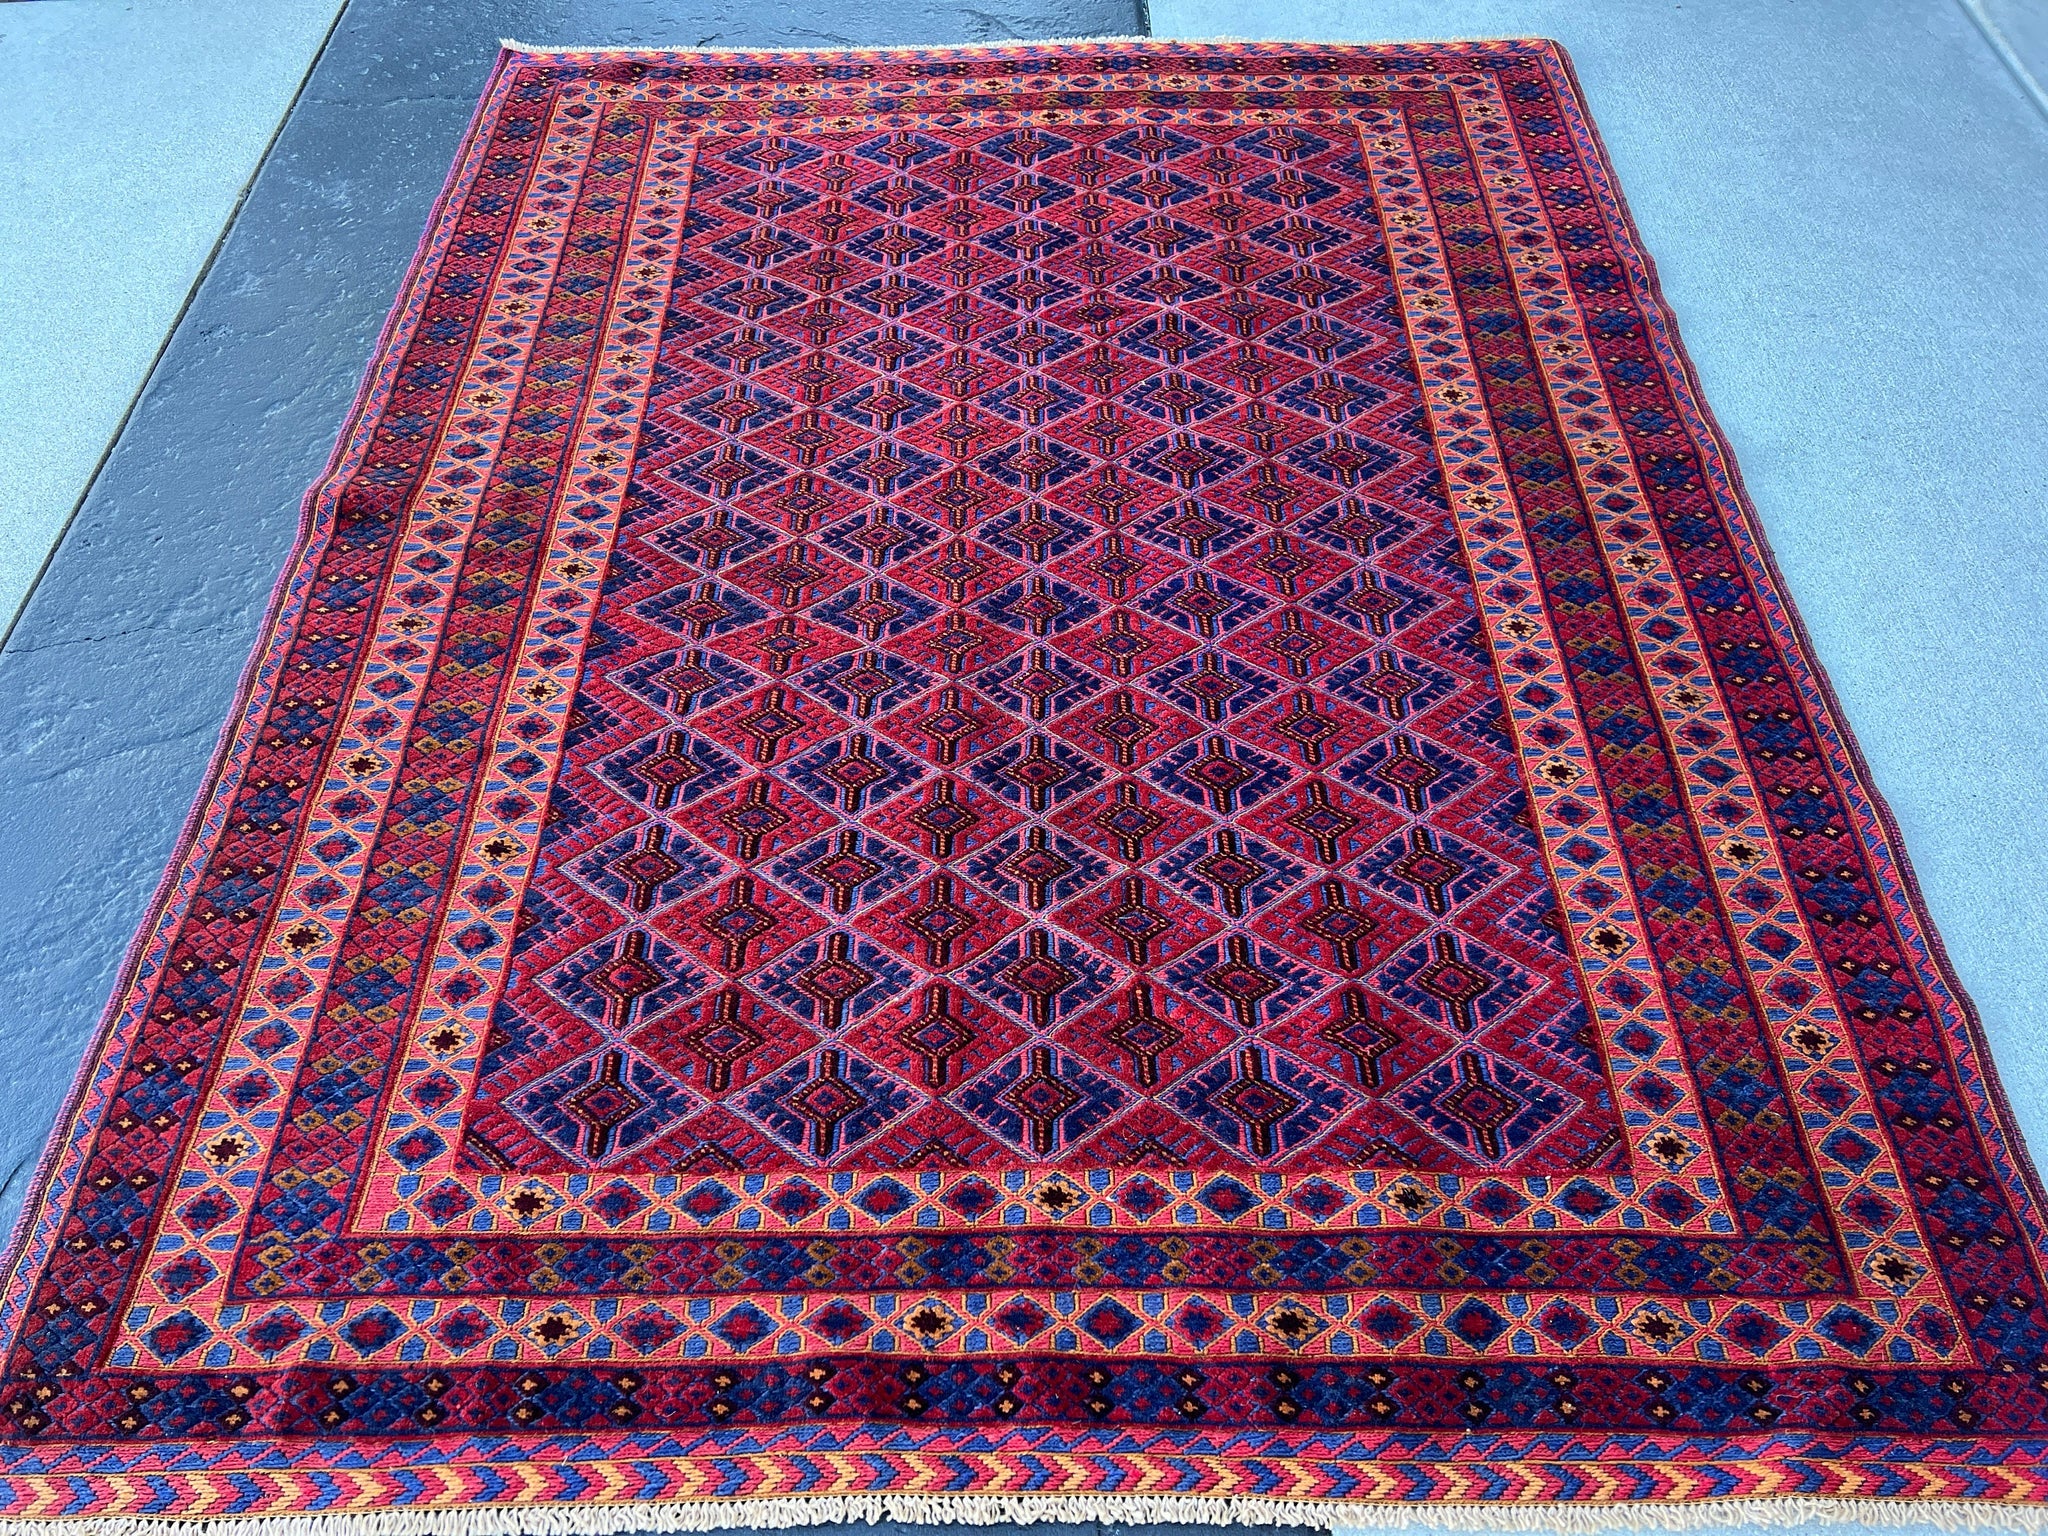 5x7 (150x215) Fair Trade Handmade Afghan Rug | Cherry Red Moss Green Black Taupe Crimson Red Midnight Blue | Hand Knotted Geometric Wool